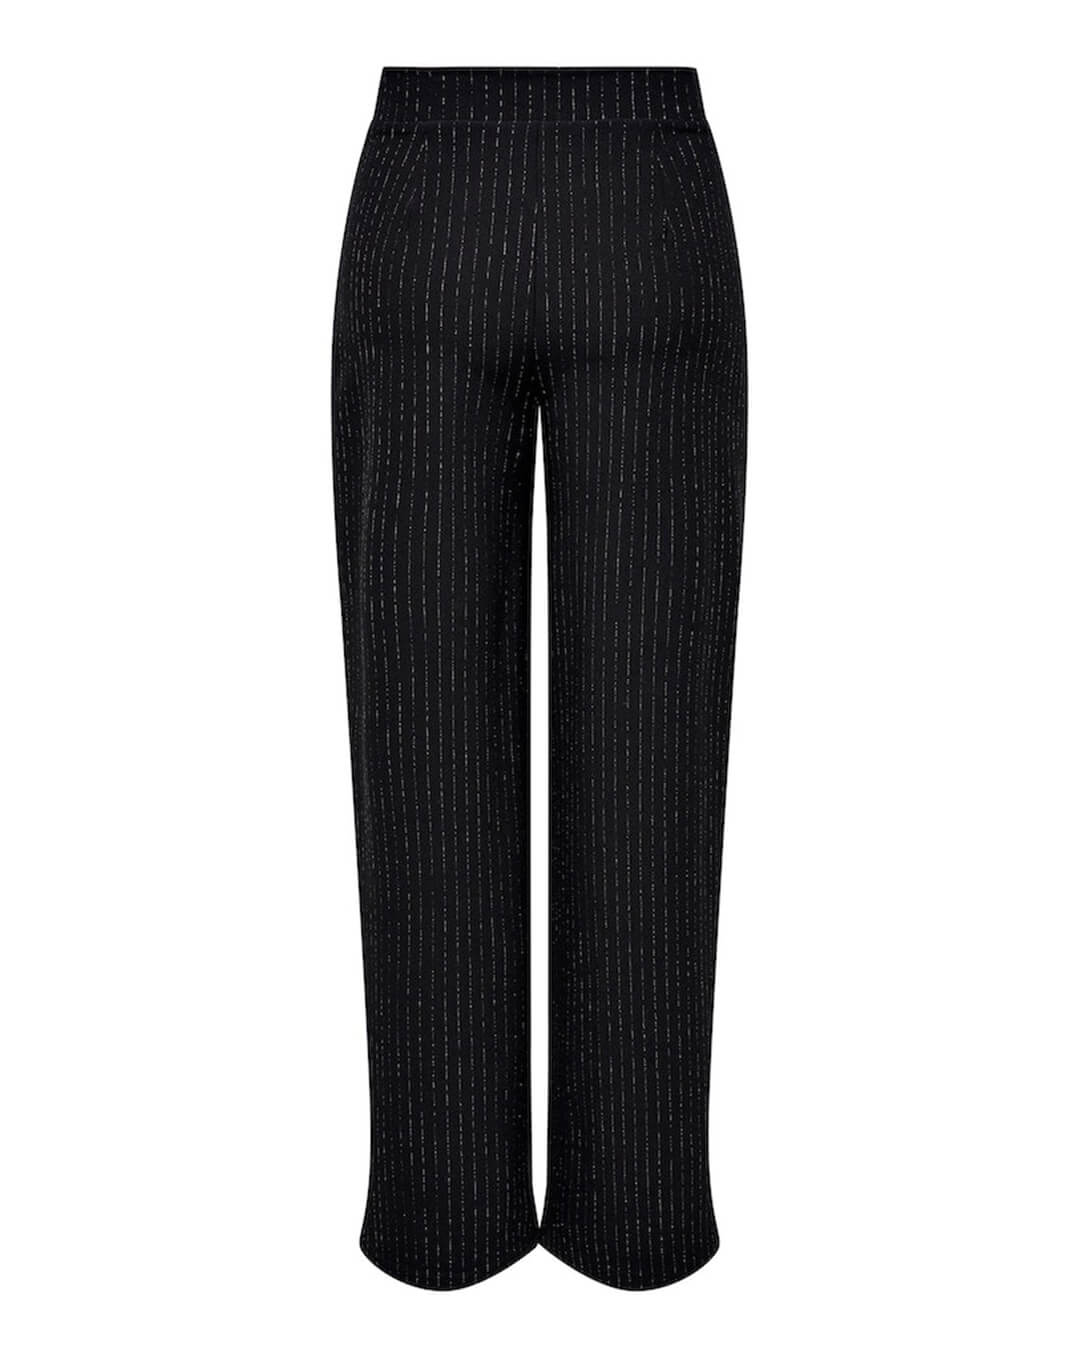 Only Trousers Only Lisa Black Shine Pinstripe Trousers